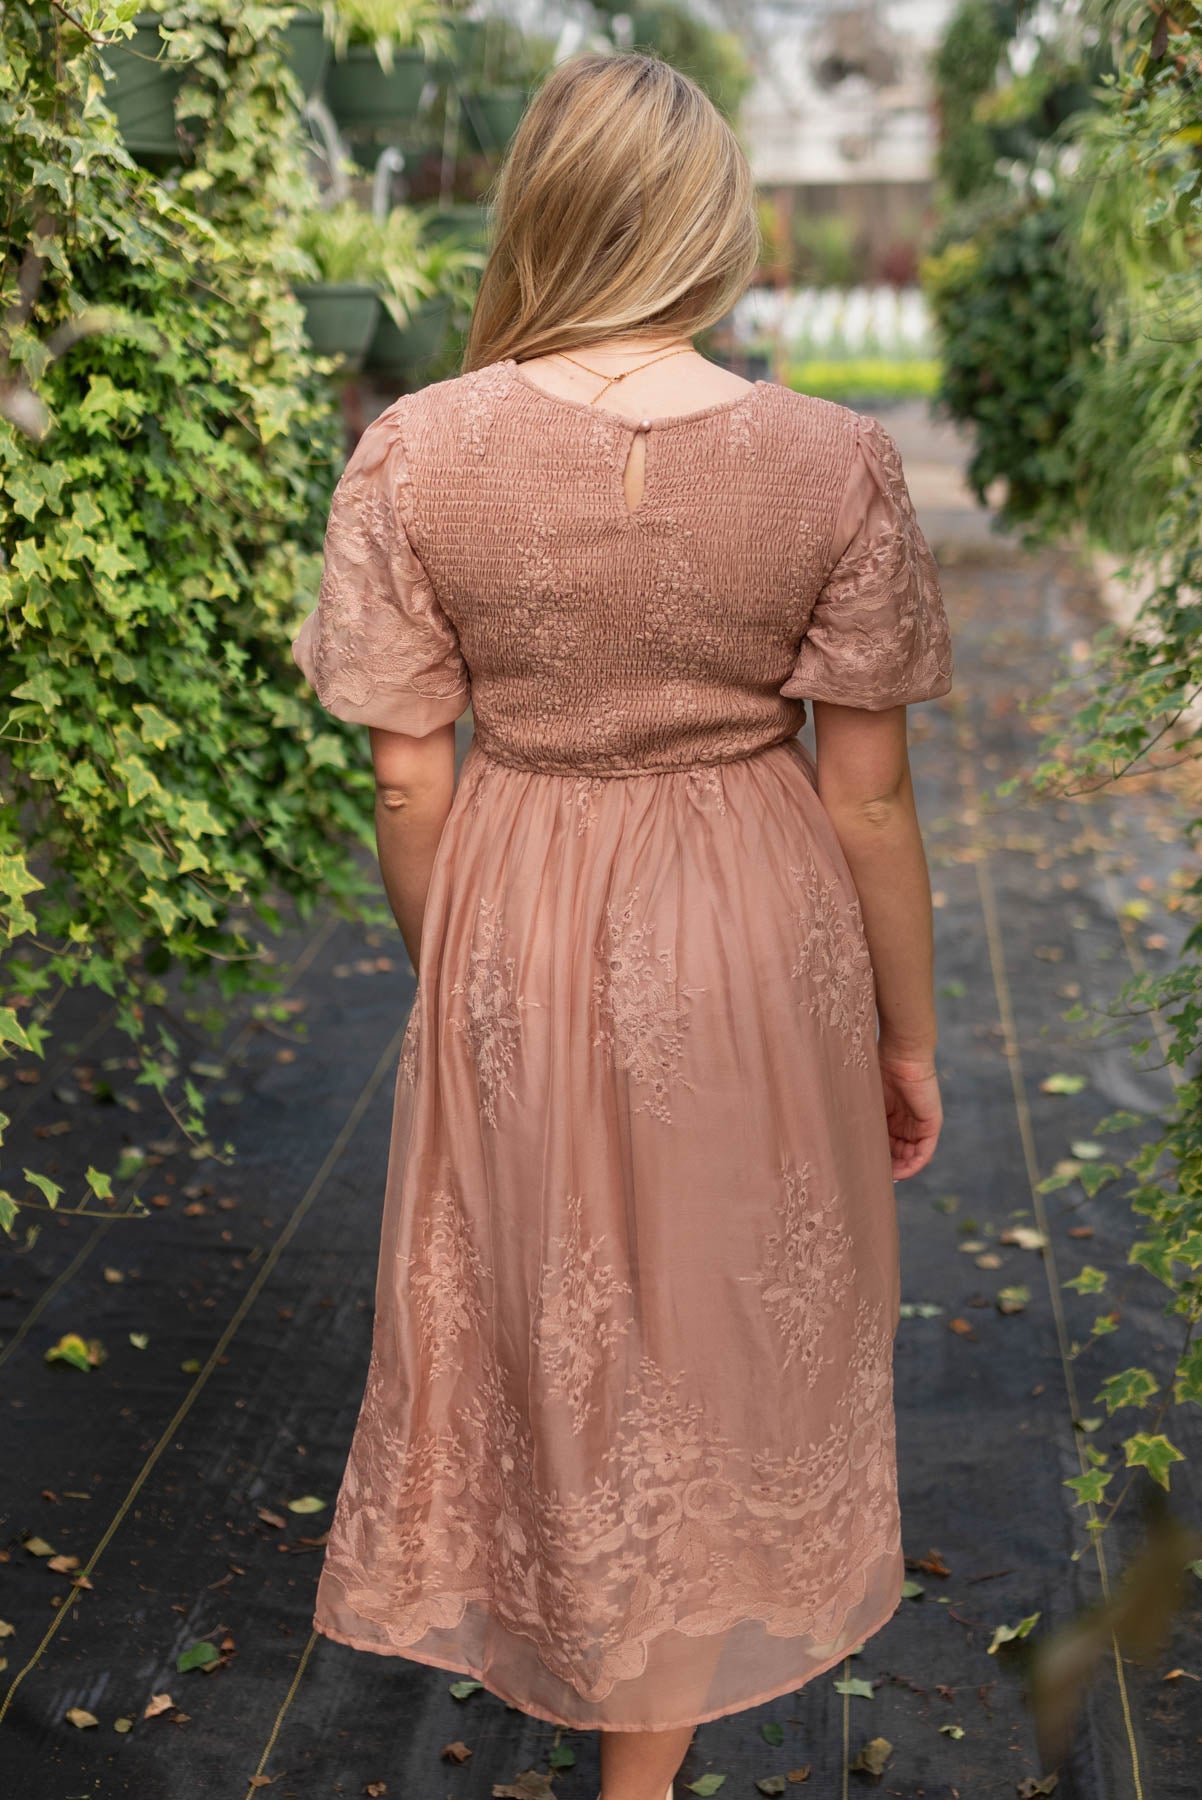 Back view of the dusty pink embroidered dress with back closer.